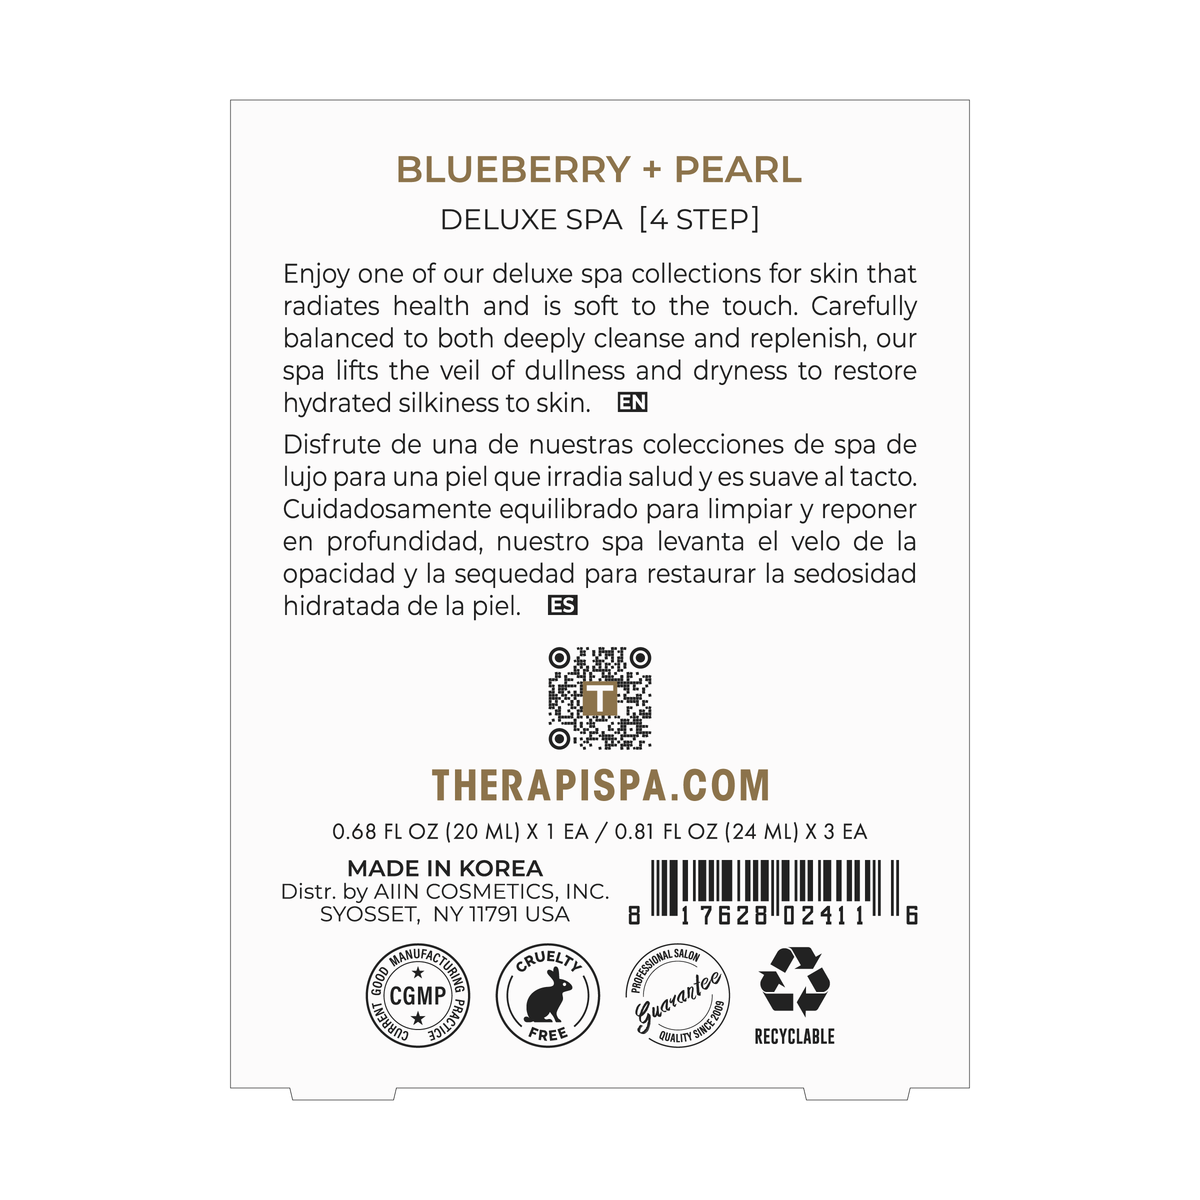 Deluxe Spa Kit / Blueberry + Pearl